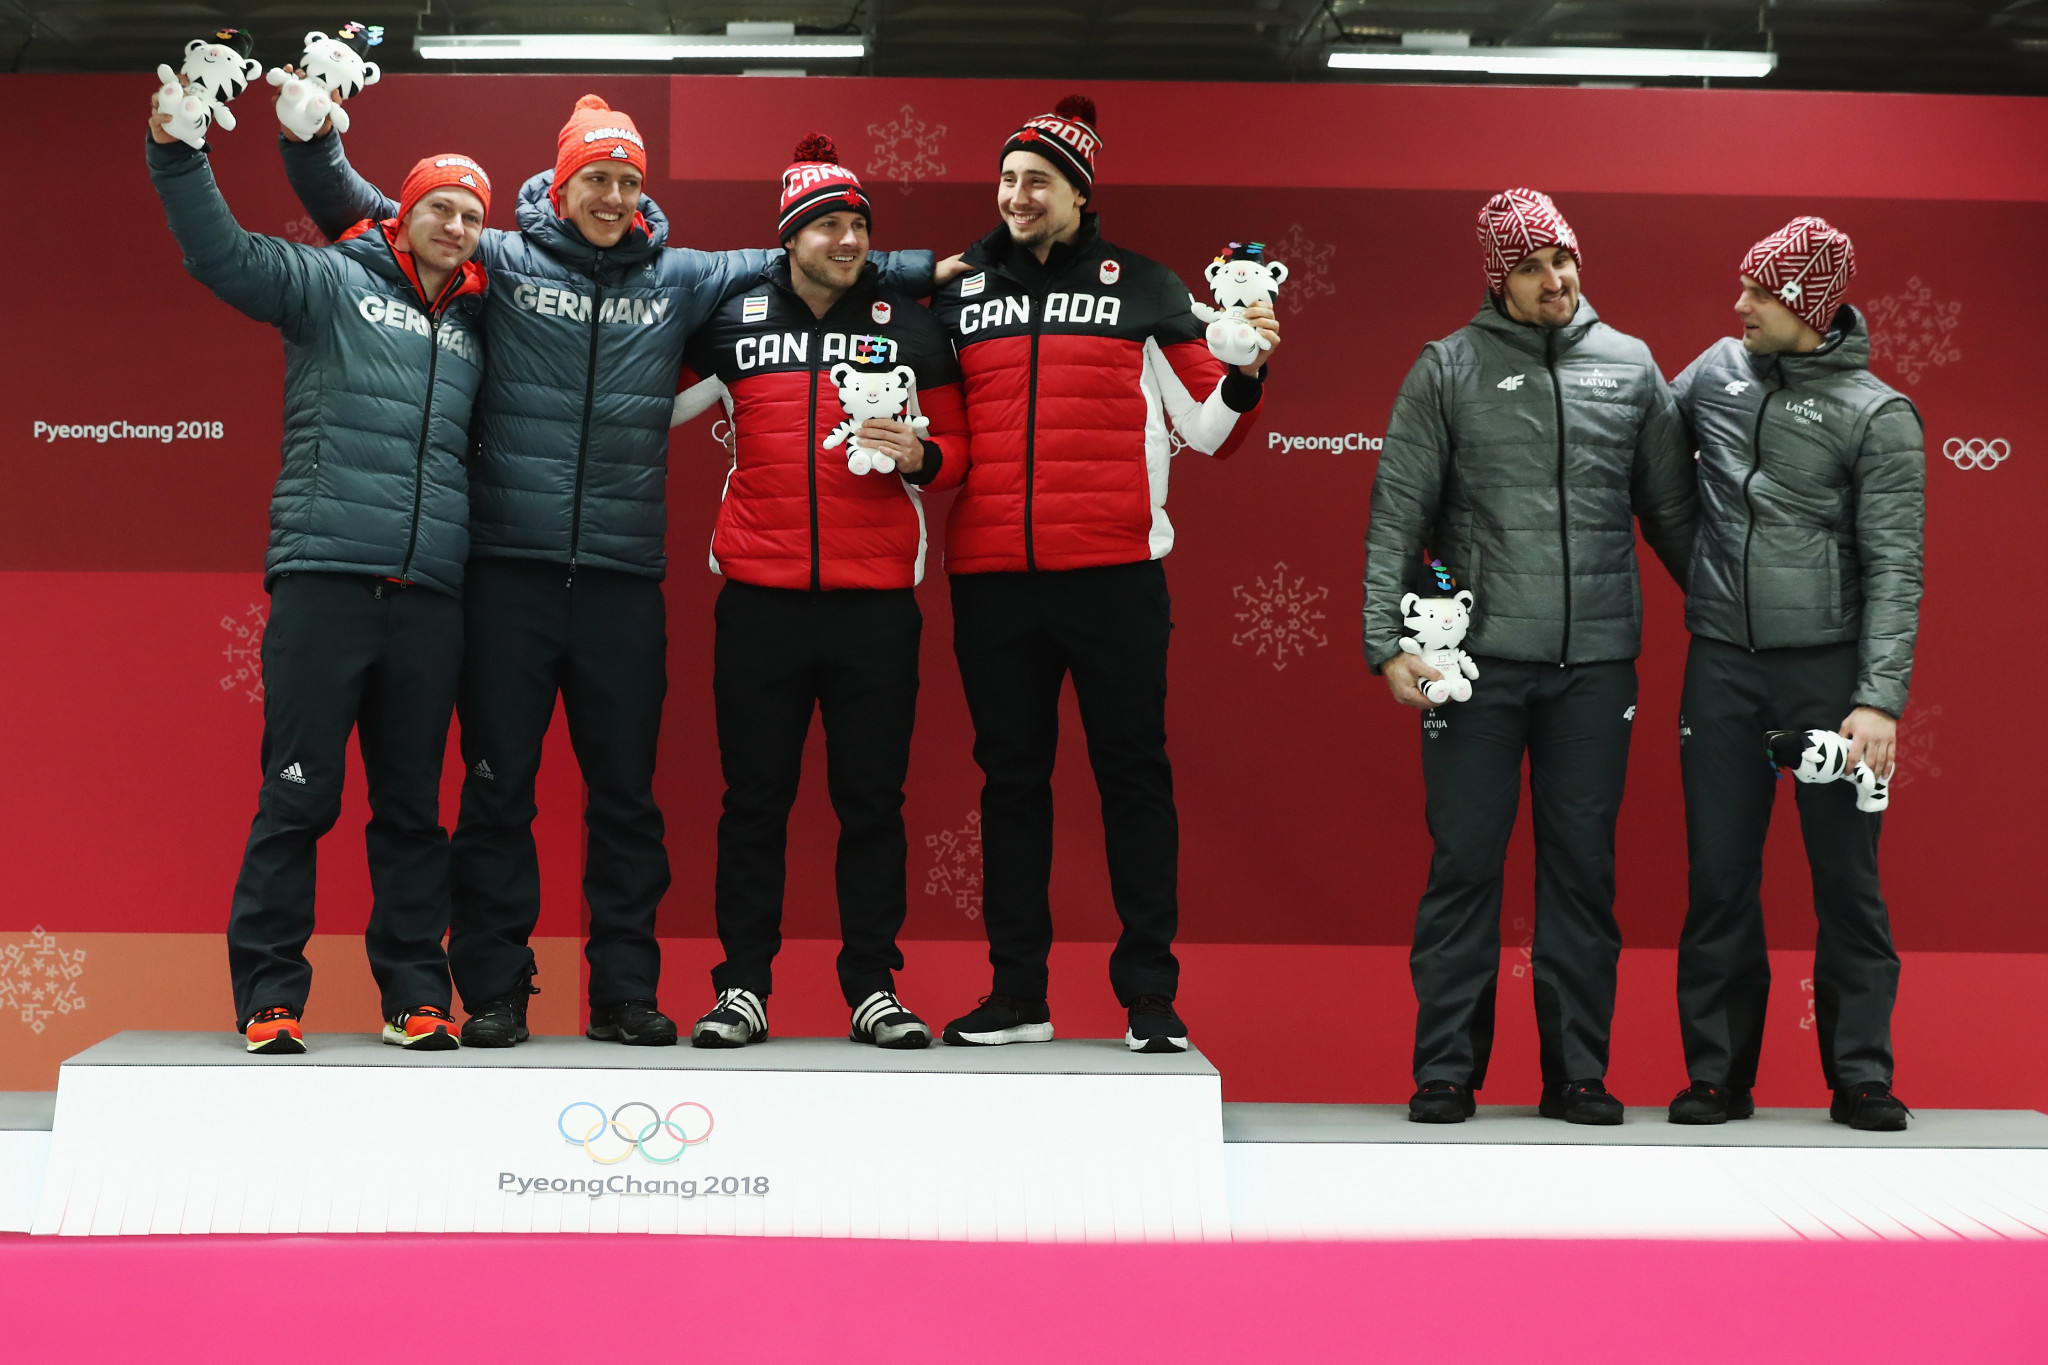 Canada and Germany shared the two-man bobsleigh gold medal at Pyeongchang 2018 Winter Olympics ©Getty Images